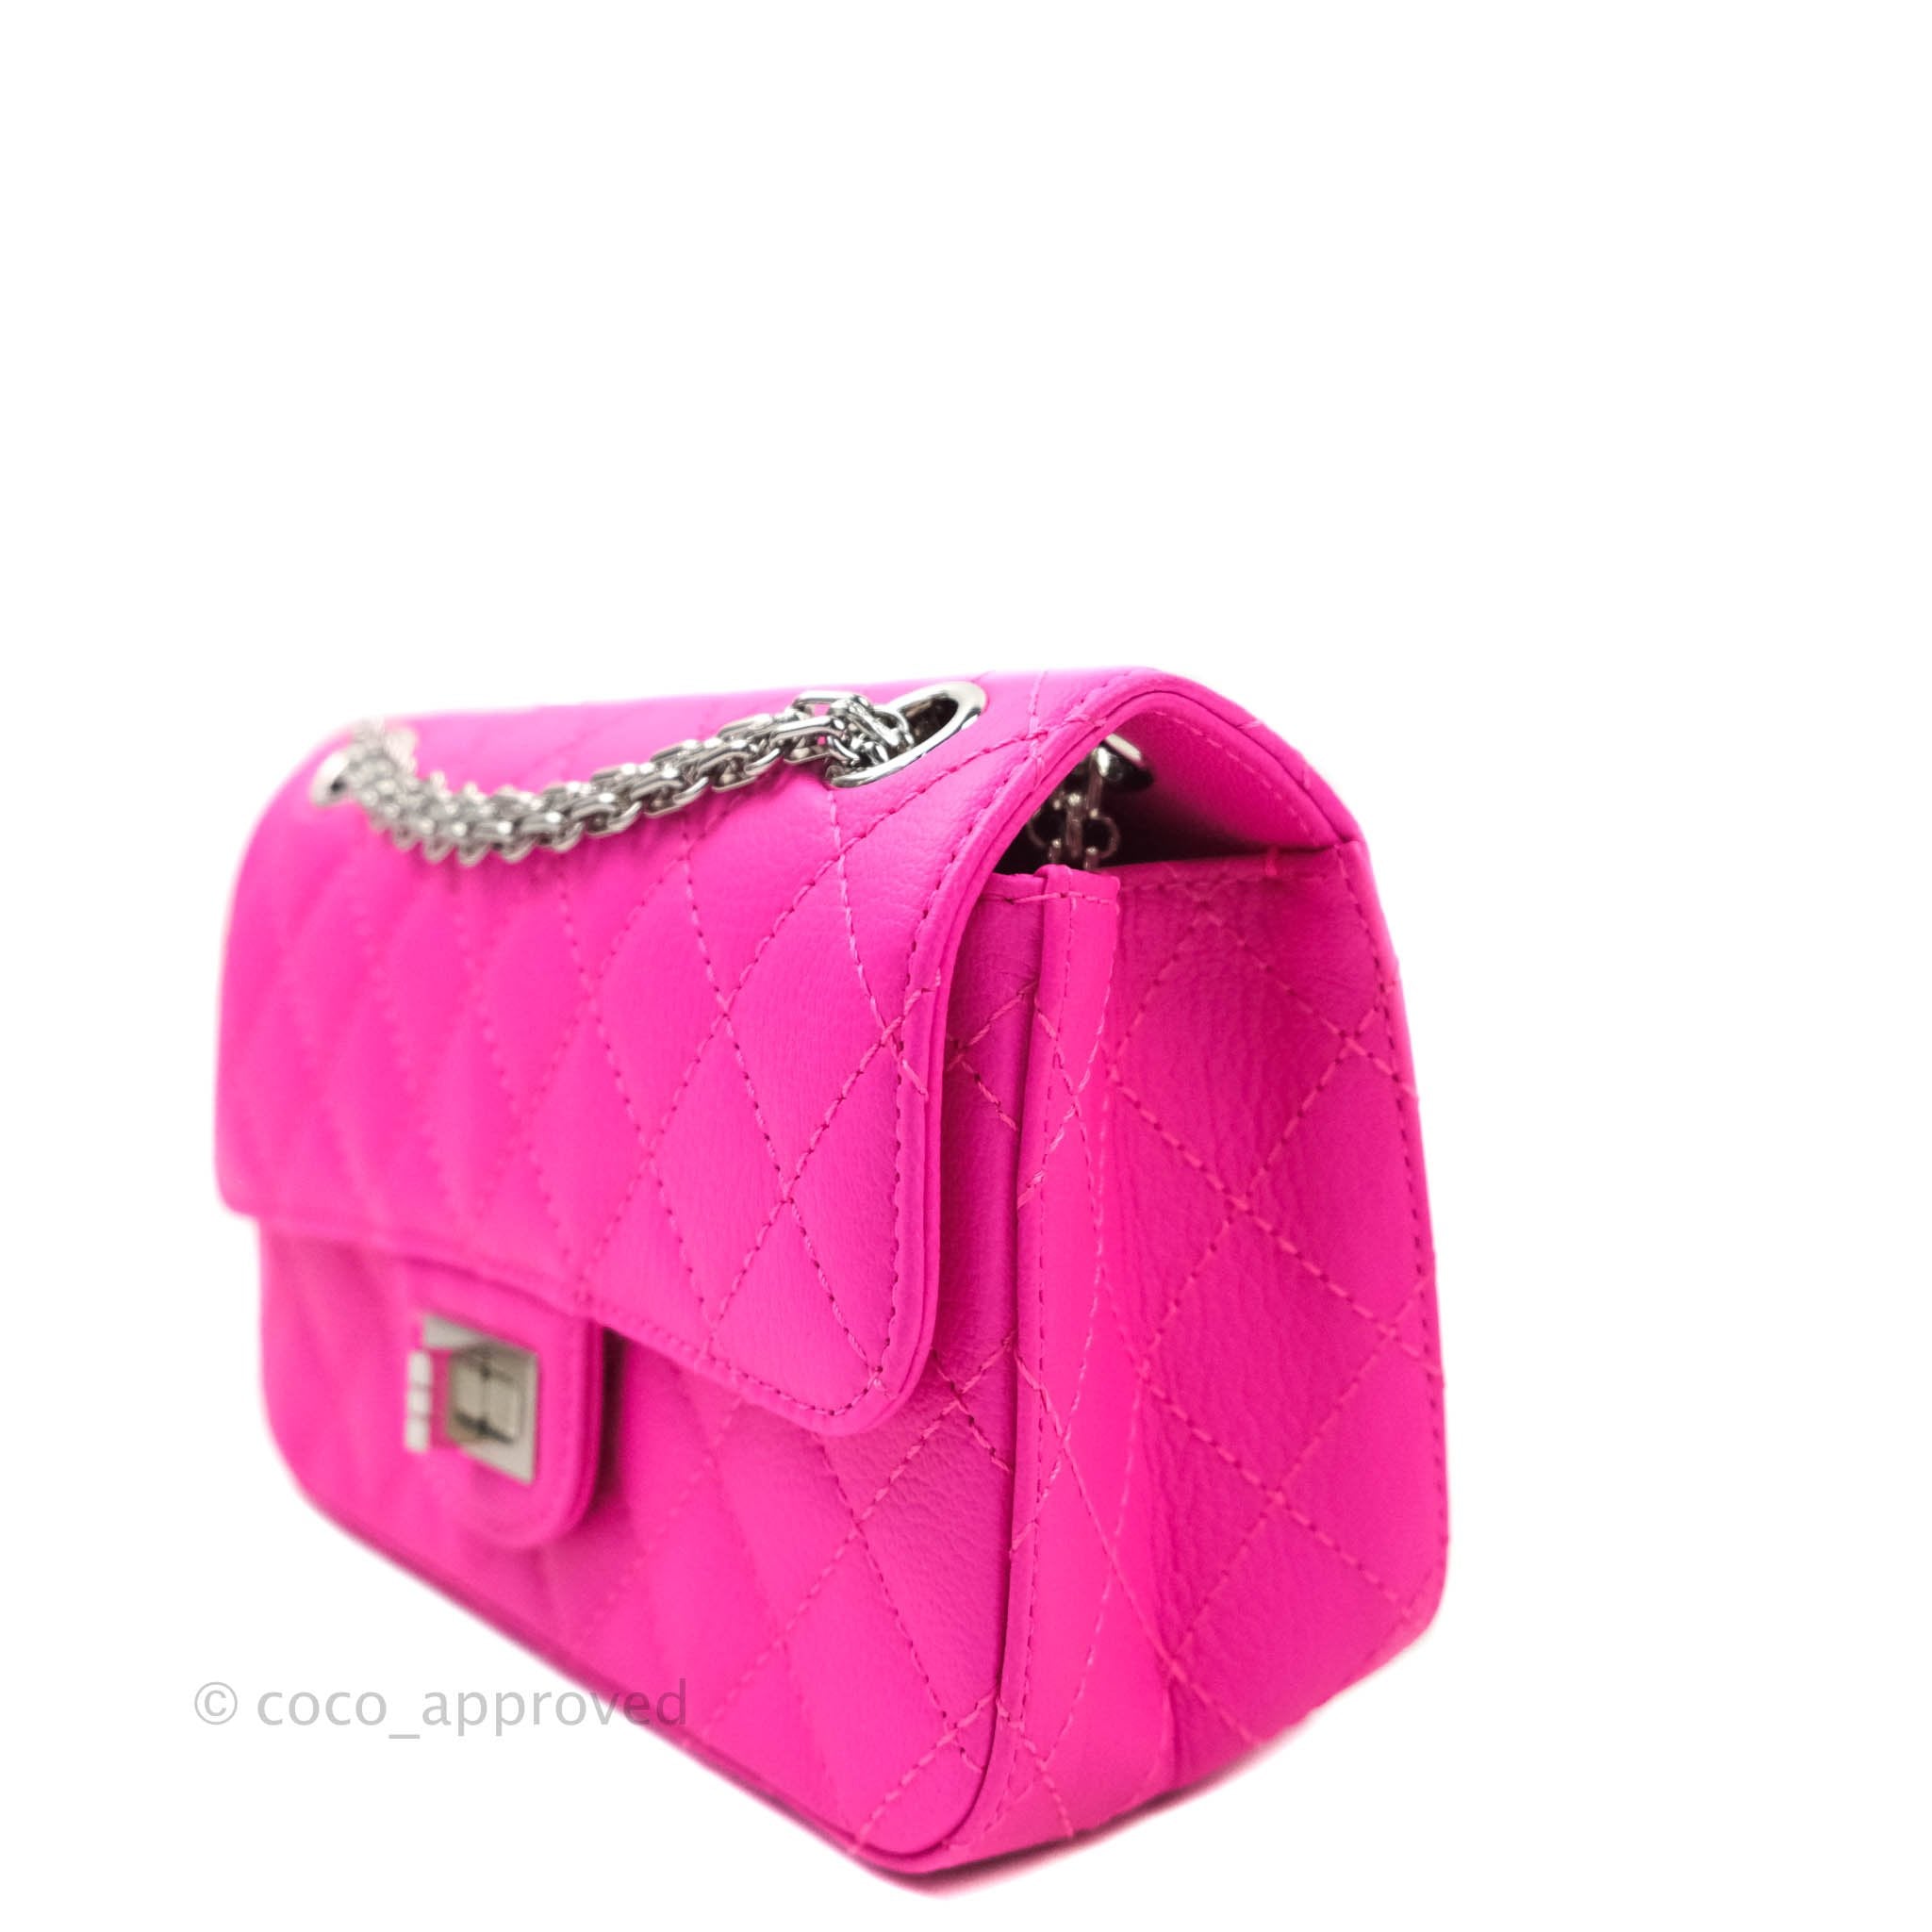 Chanel Hot Pink 2.55 Quilted Classic Chevre Leather Reissue 224